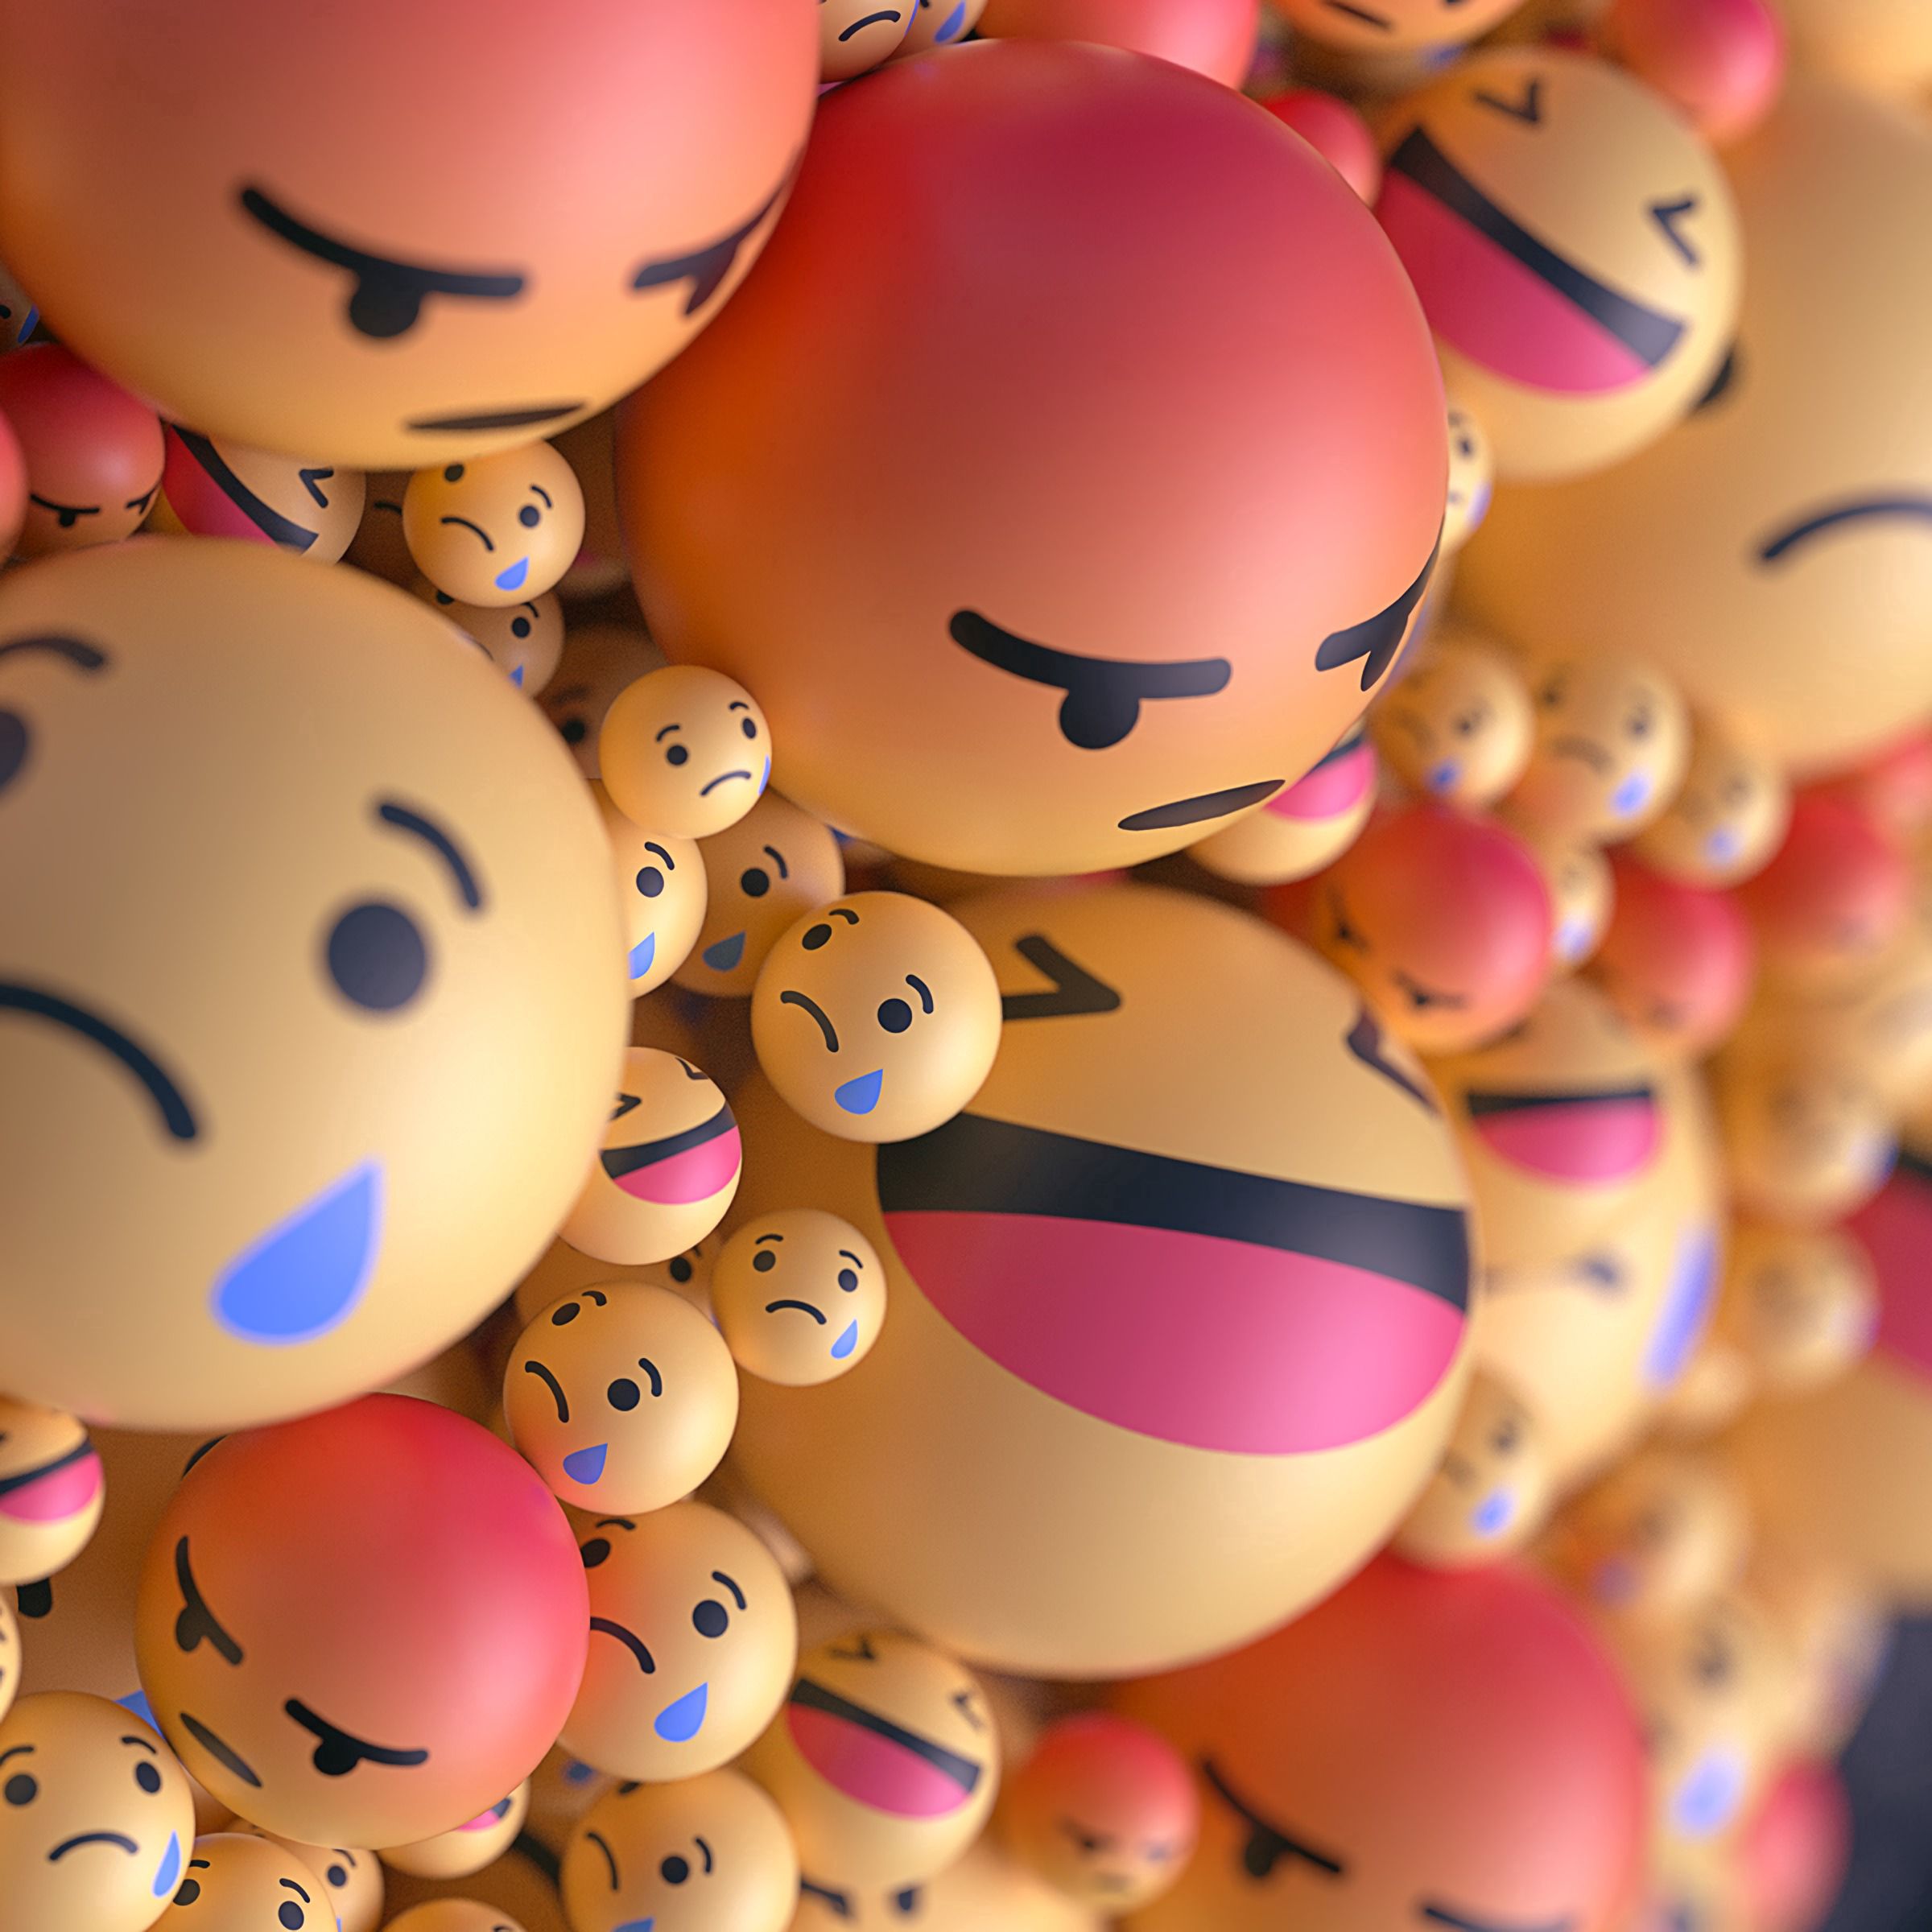 3d, emoticons, smiles, balloons, taw, smilies, smileys, emotions